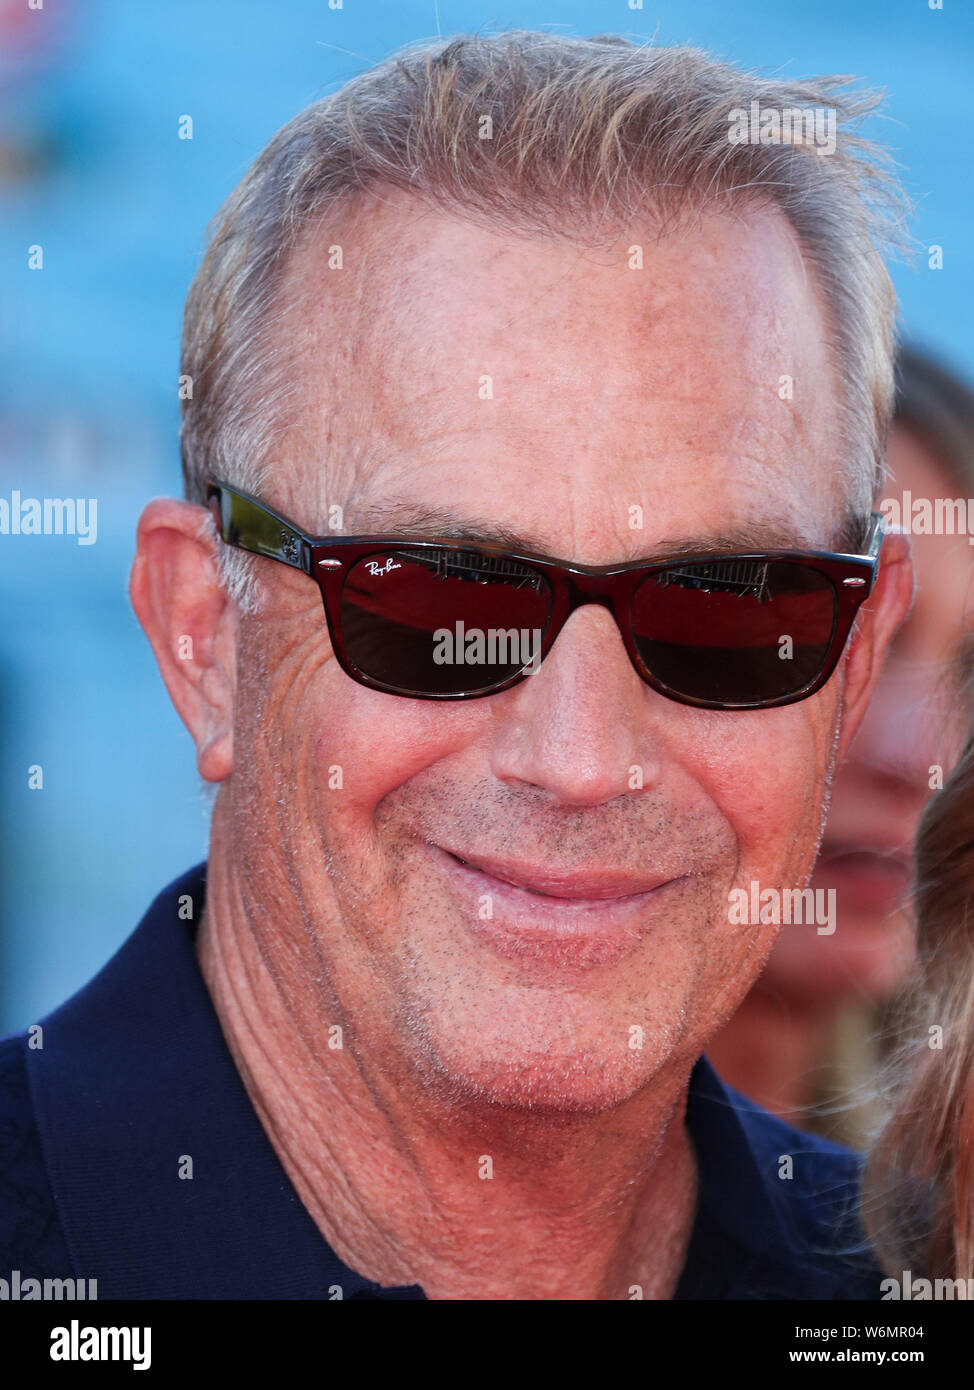 HOLLYWOOD, LOS ANGELES, CALIFORNIA, USA - AUGUST 01: Actor Kevin Costner arrives at the Los Angeles Premiere Of 20th Century Fox's 'The Art Of Racing In The Rain' held at the El Capitan Theatre on August 1, 2019 in Hollywood, Los Angeles, California, United States. (Photo by Xavier Collin/Image Press Agency) Stock Photo